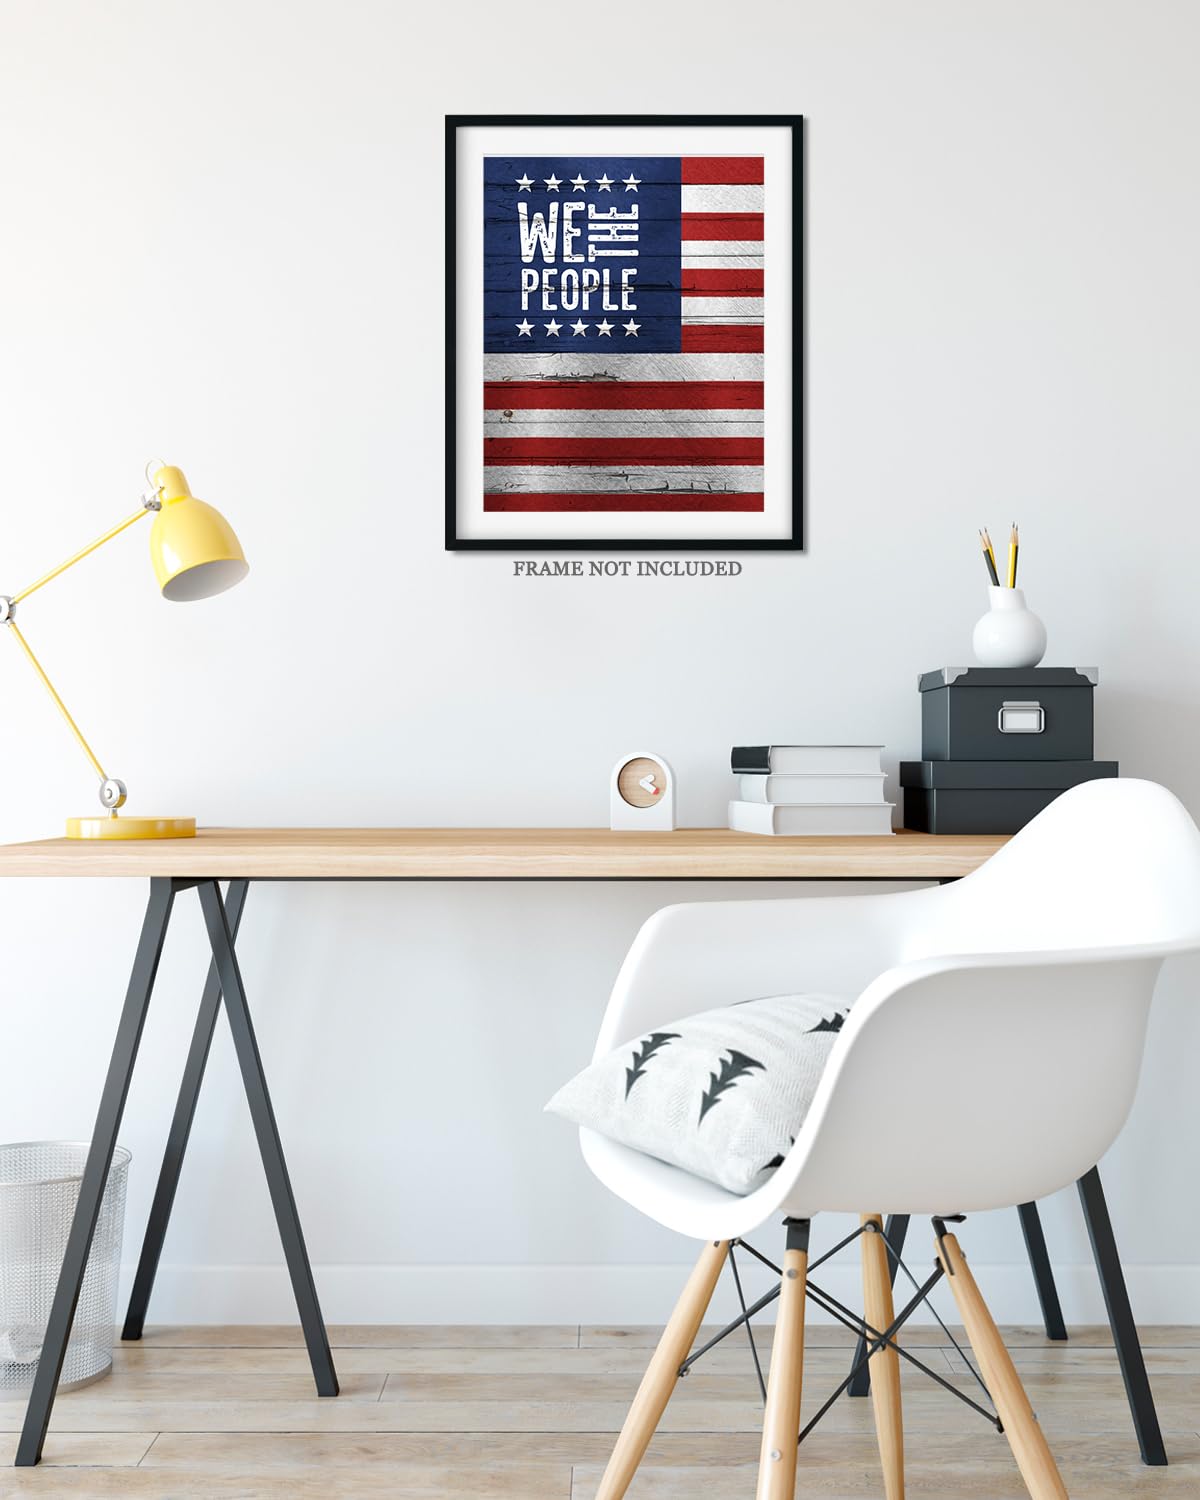 American Flag Wall Art - Patriotic Wall Decor - Veterans, Memorial Day and 4th of July Canvas - Farmhouse Decor - Gift for Americana History Buffs Military Vets Patriots